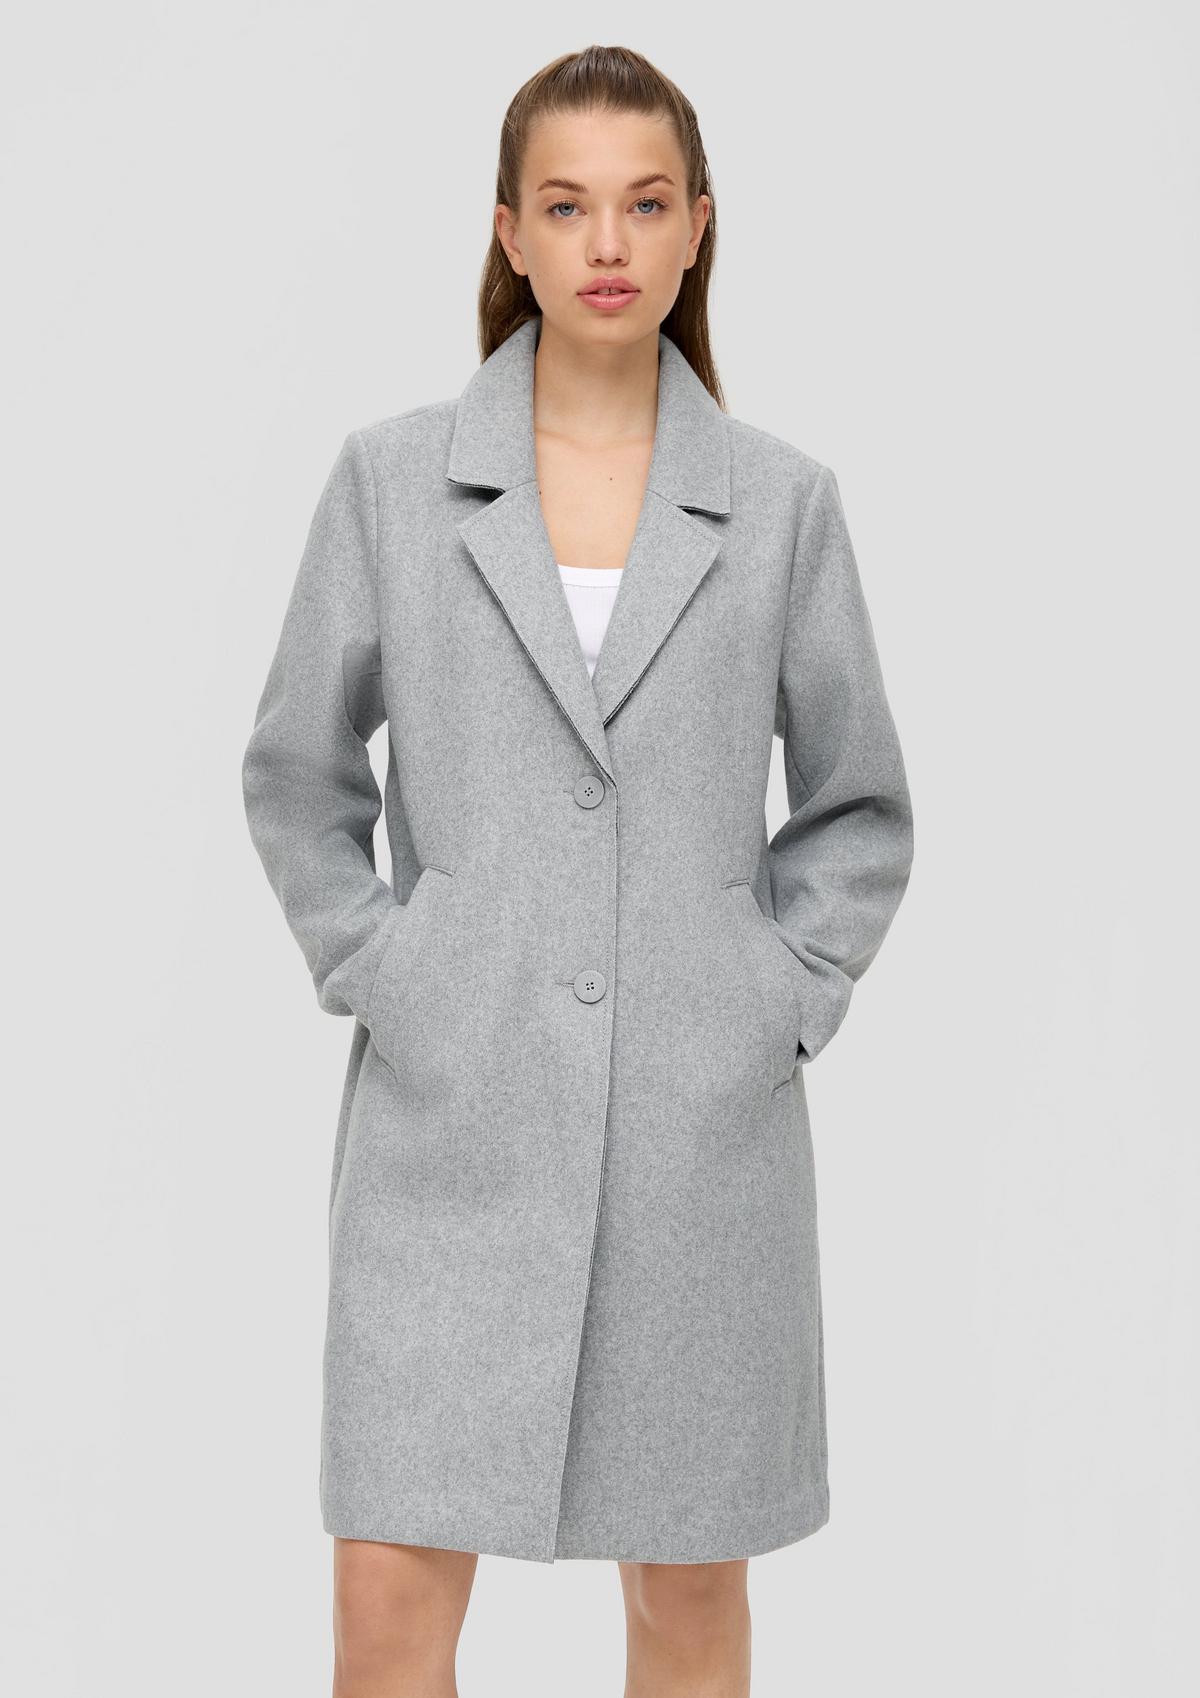 Wool coat with a turn-down collar